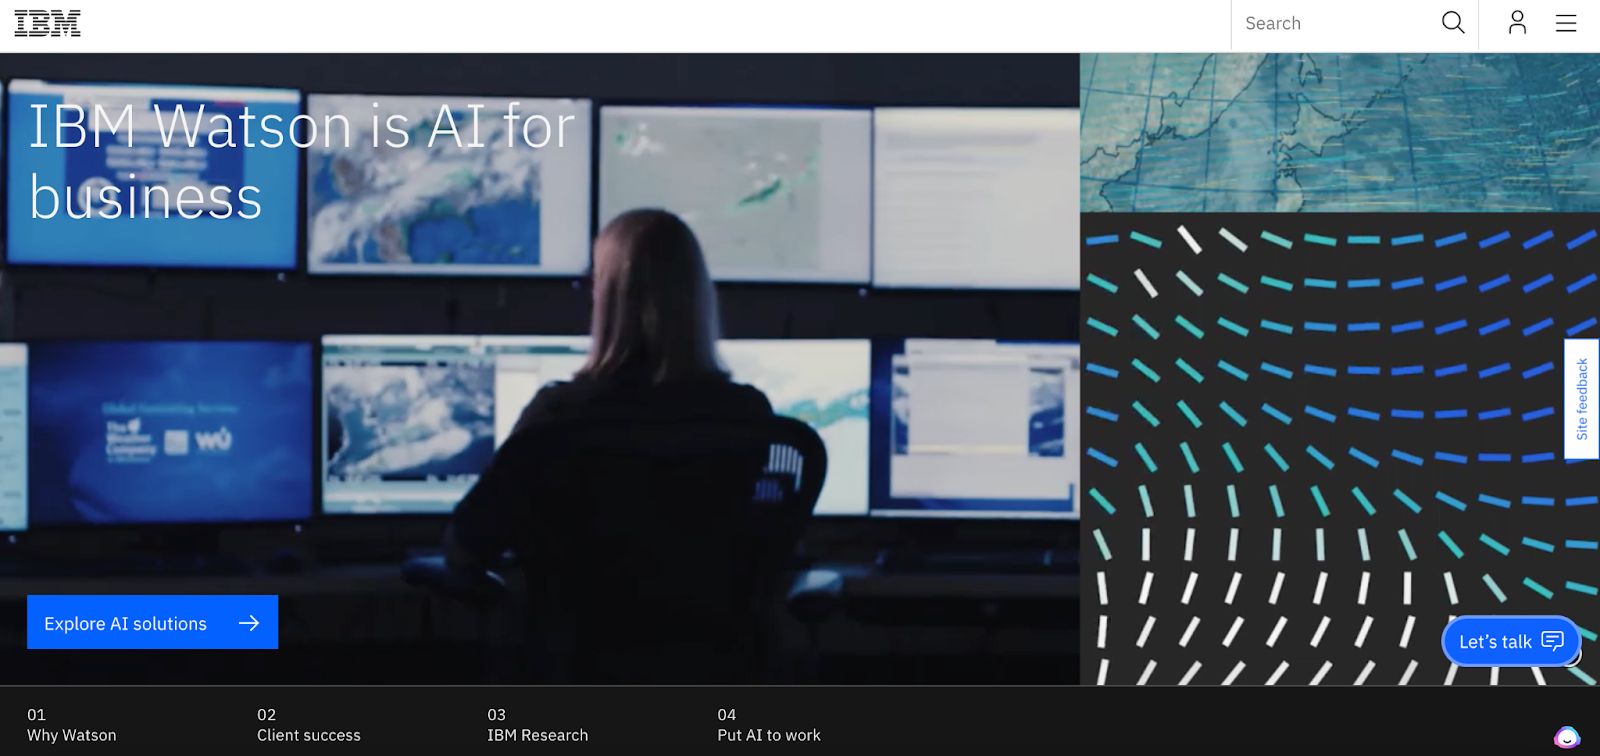 The image displays the homepage of IBM Watson with a video of a woman looking at a wall of computer screens.
